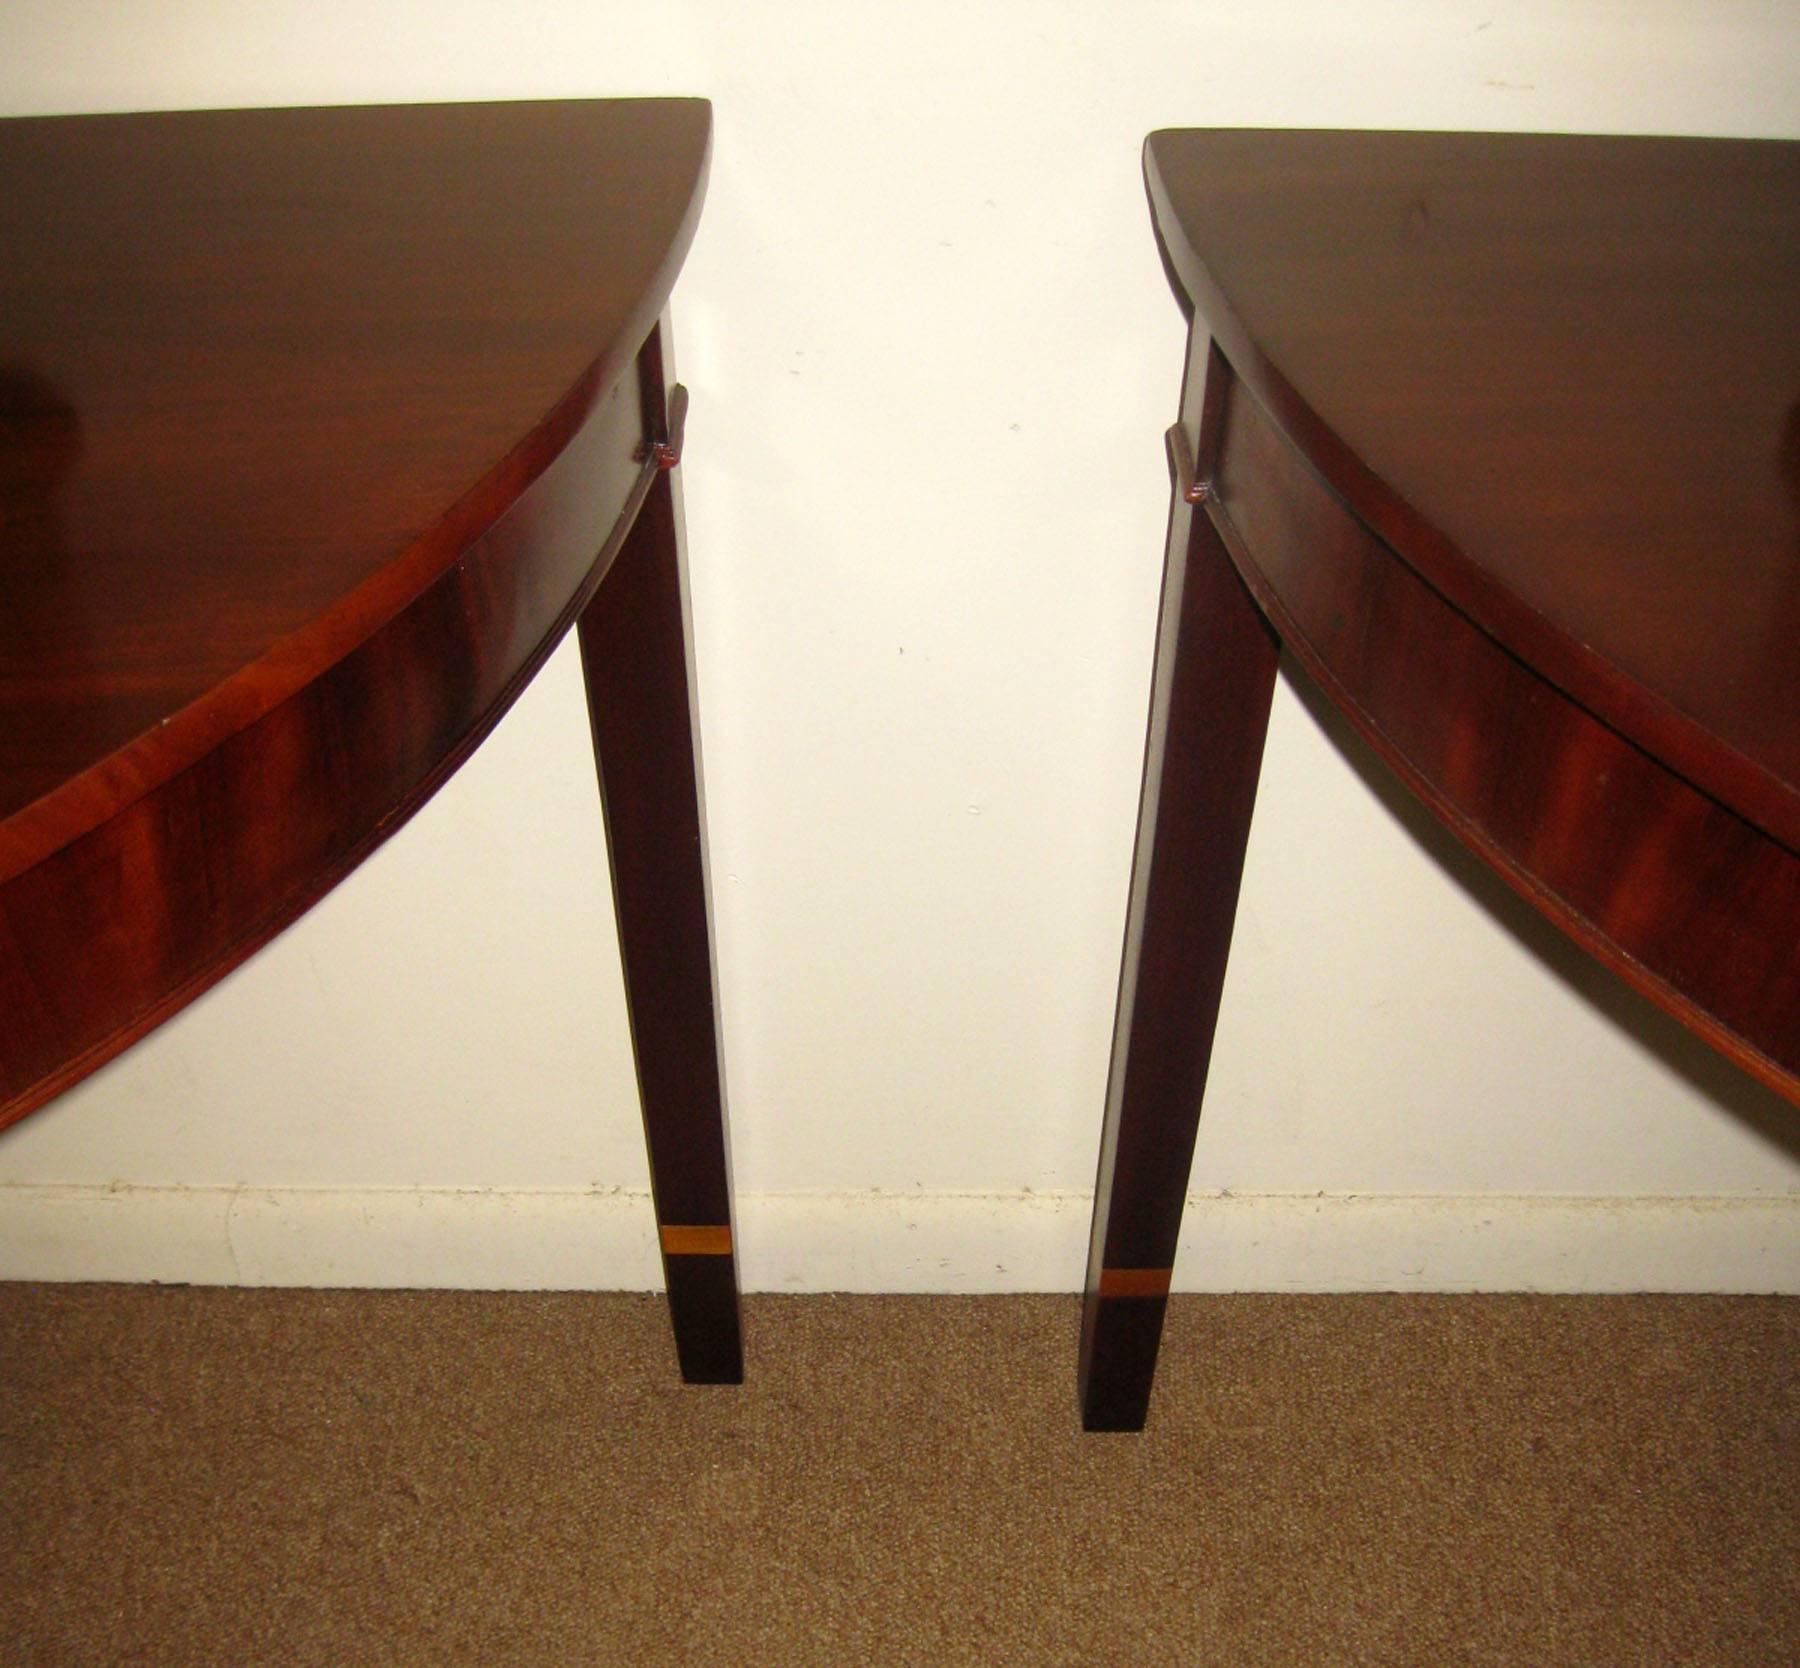 Handsome pair of English Hepplewhite style mahogany demi-lune console tables featuring four slightly tapered legs.
Large size. See measurements below.